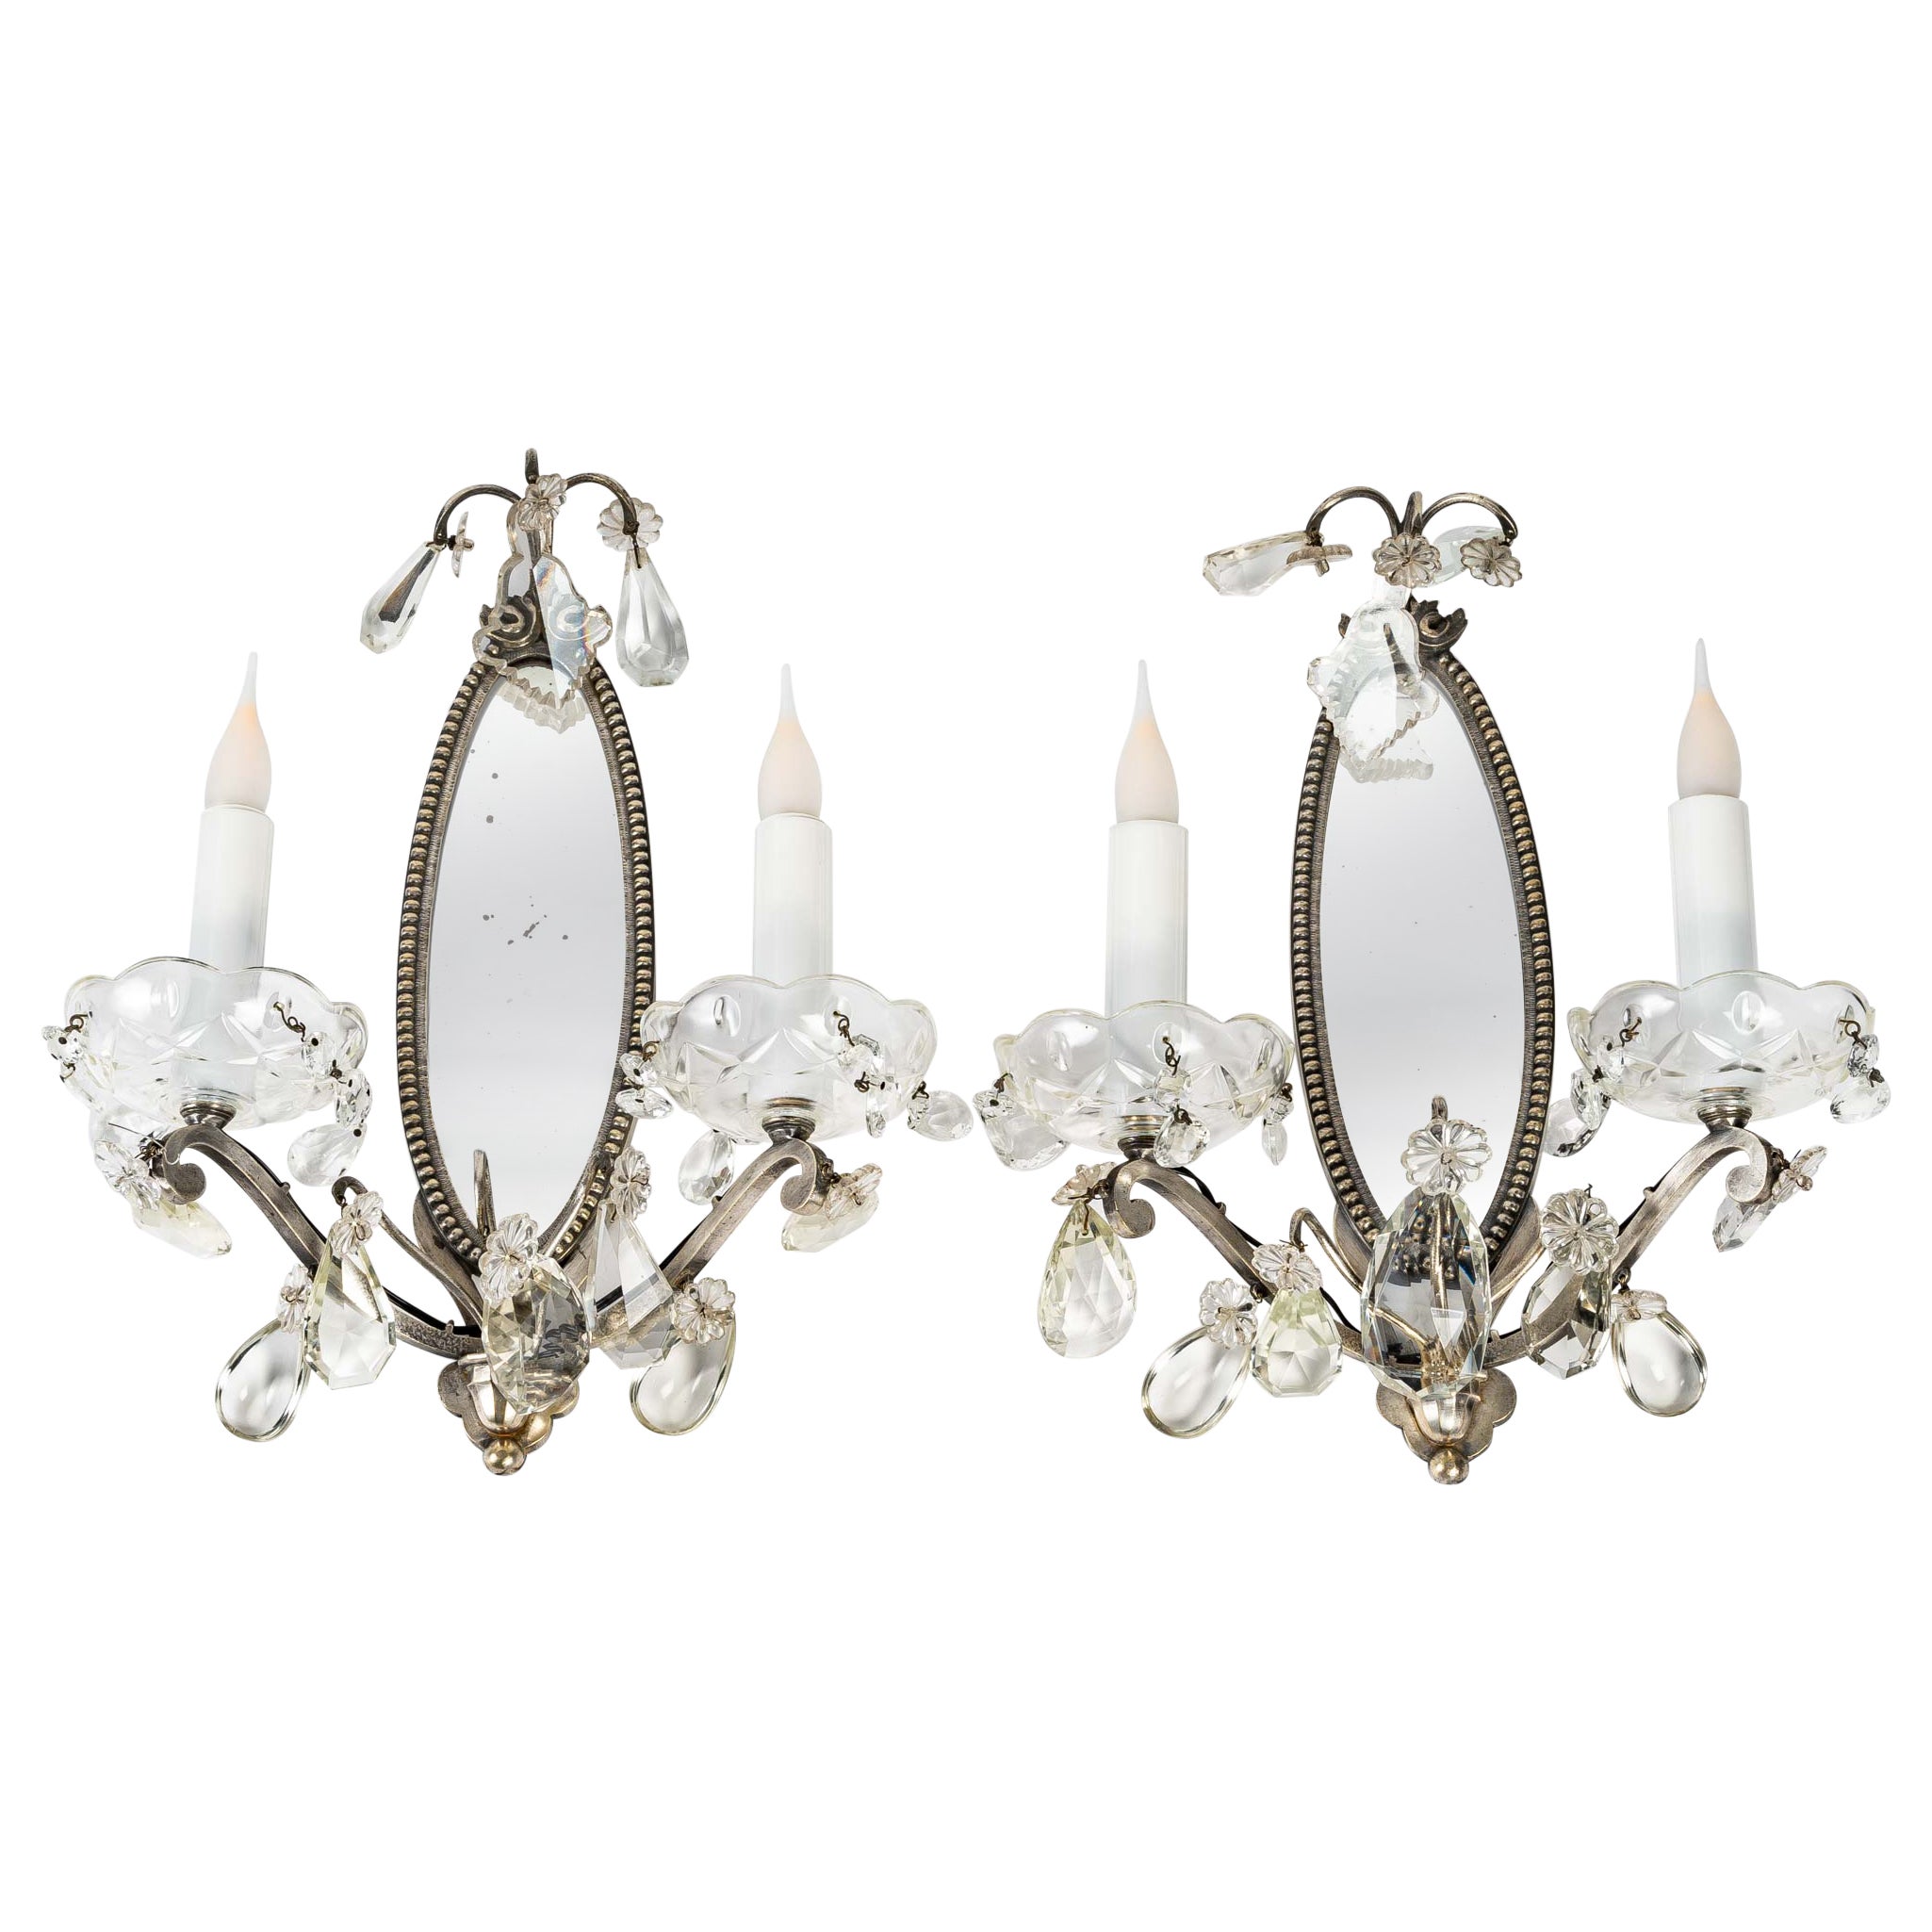 Pair of 1930's Sconces in the Bagués Style